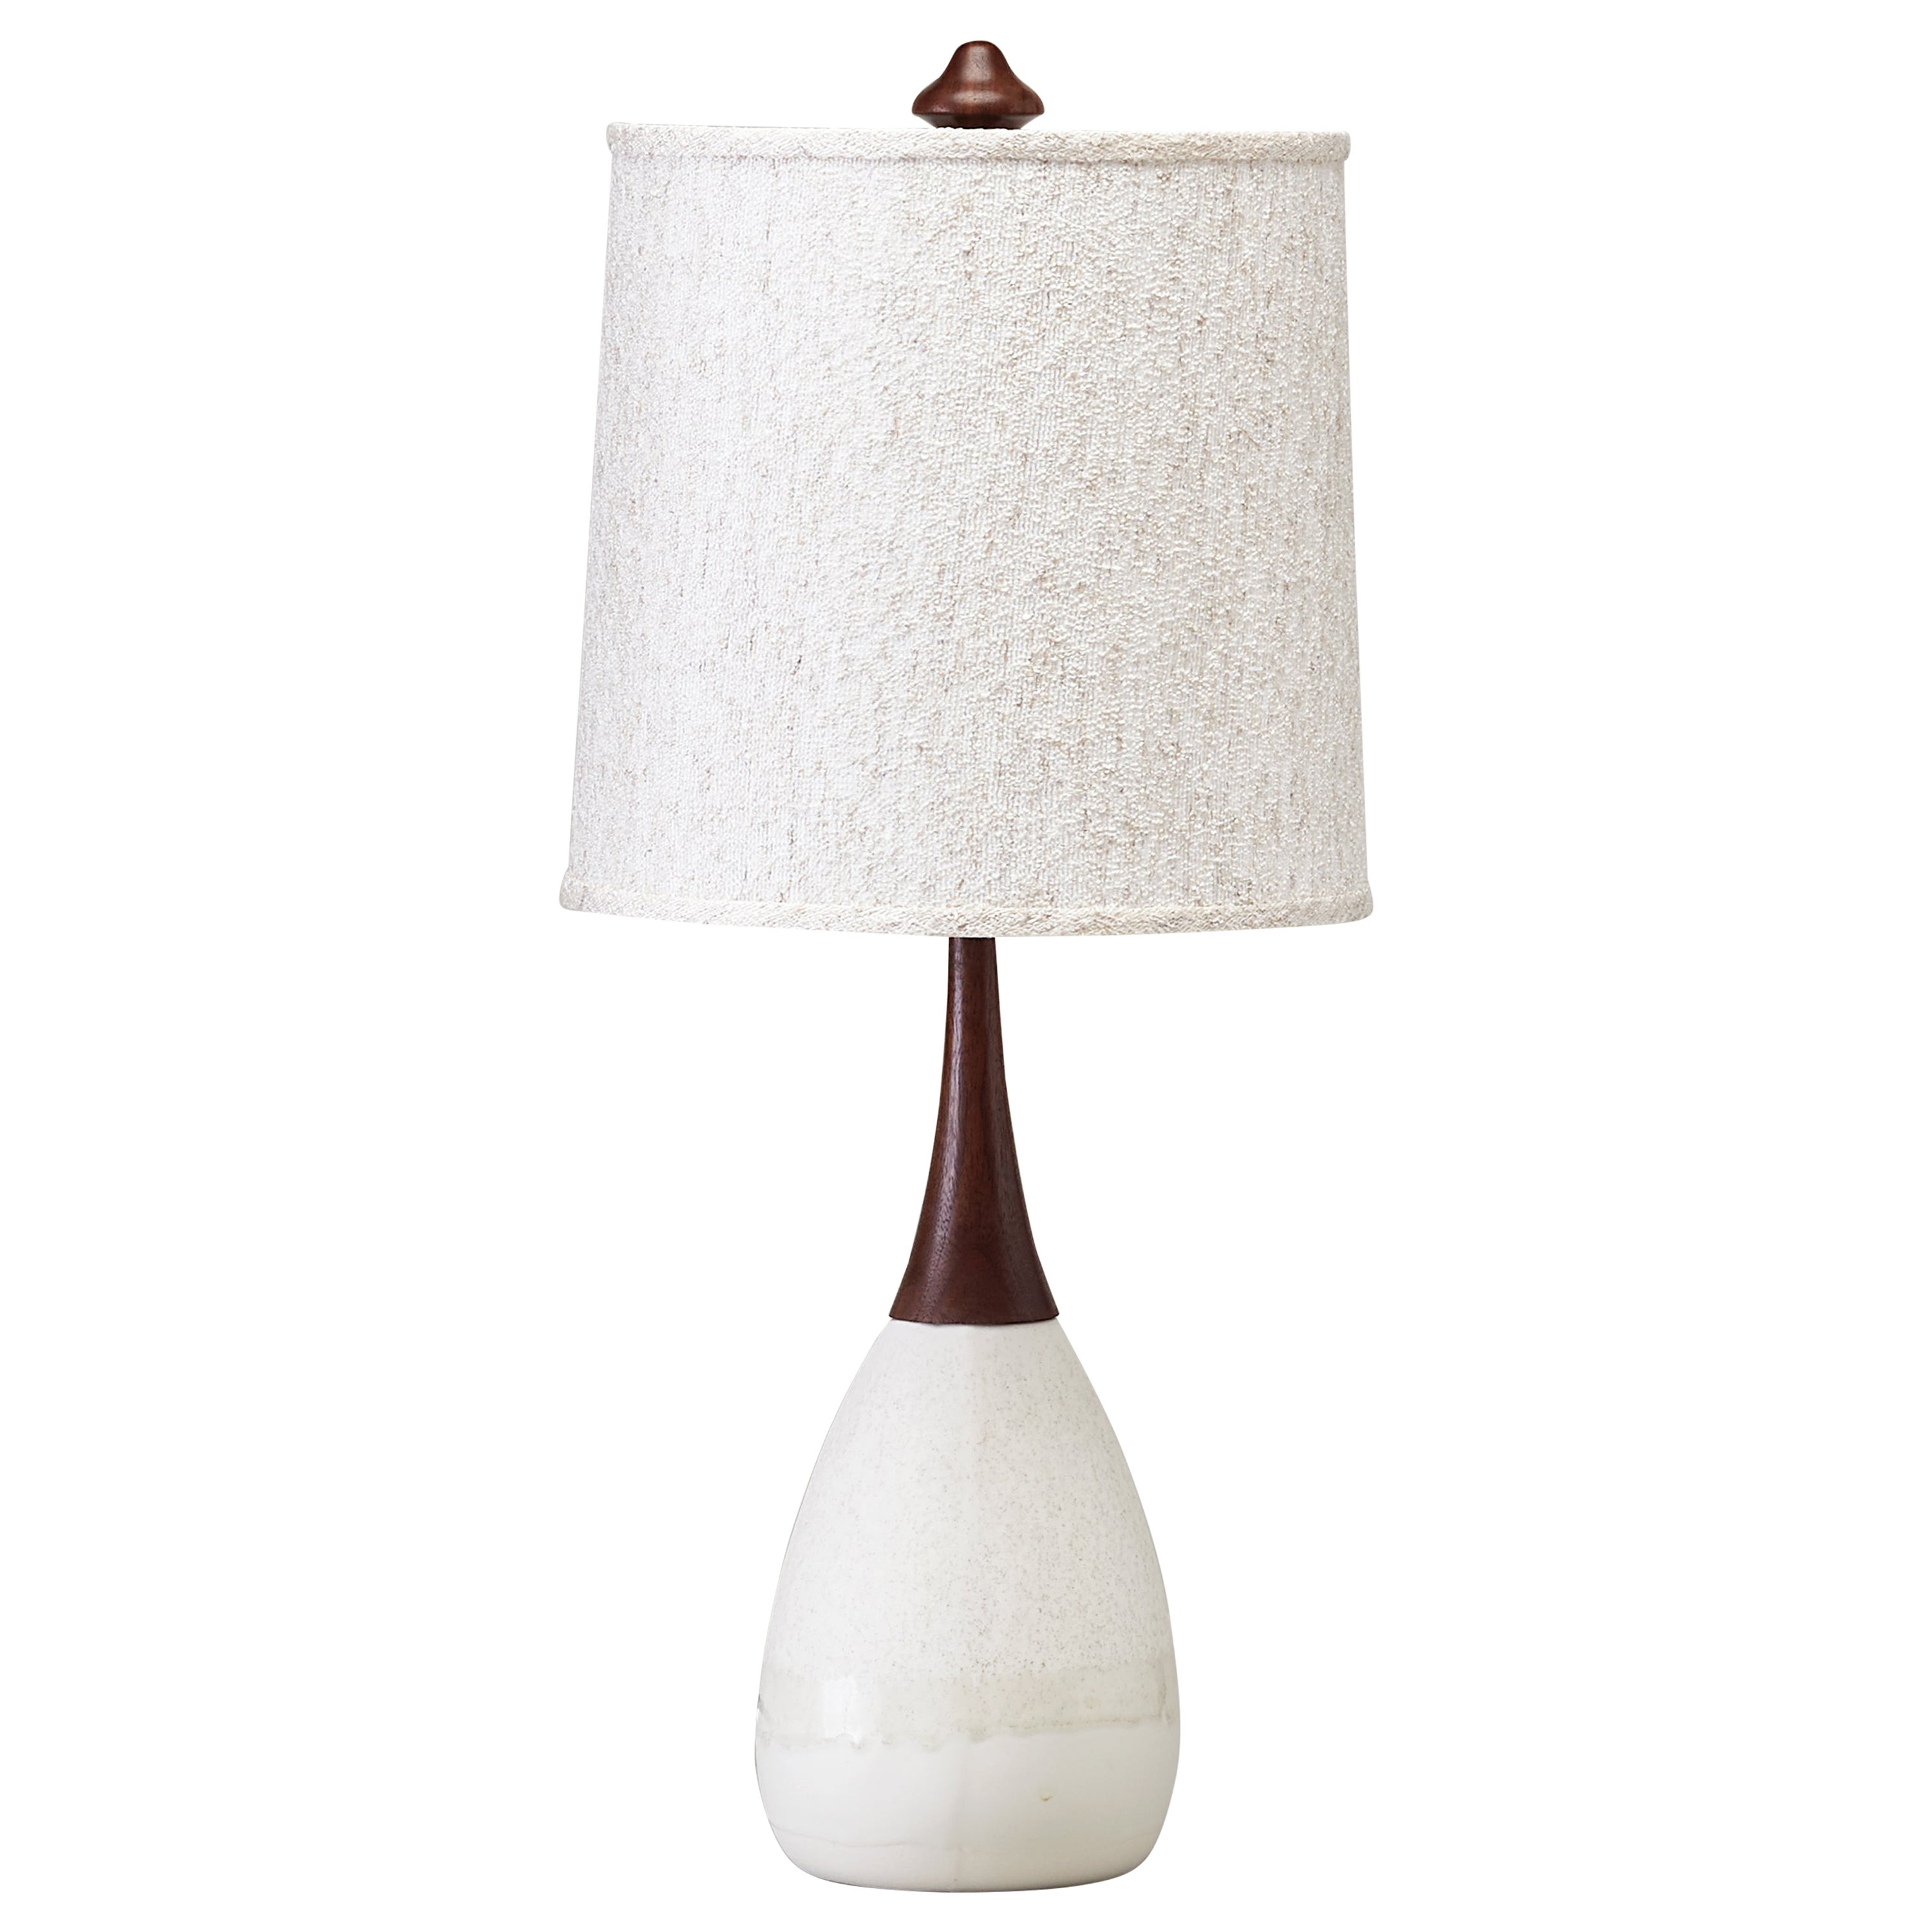 Handcrafted Mid Century Inspired Porcelain and Walnut Table Lamp